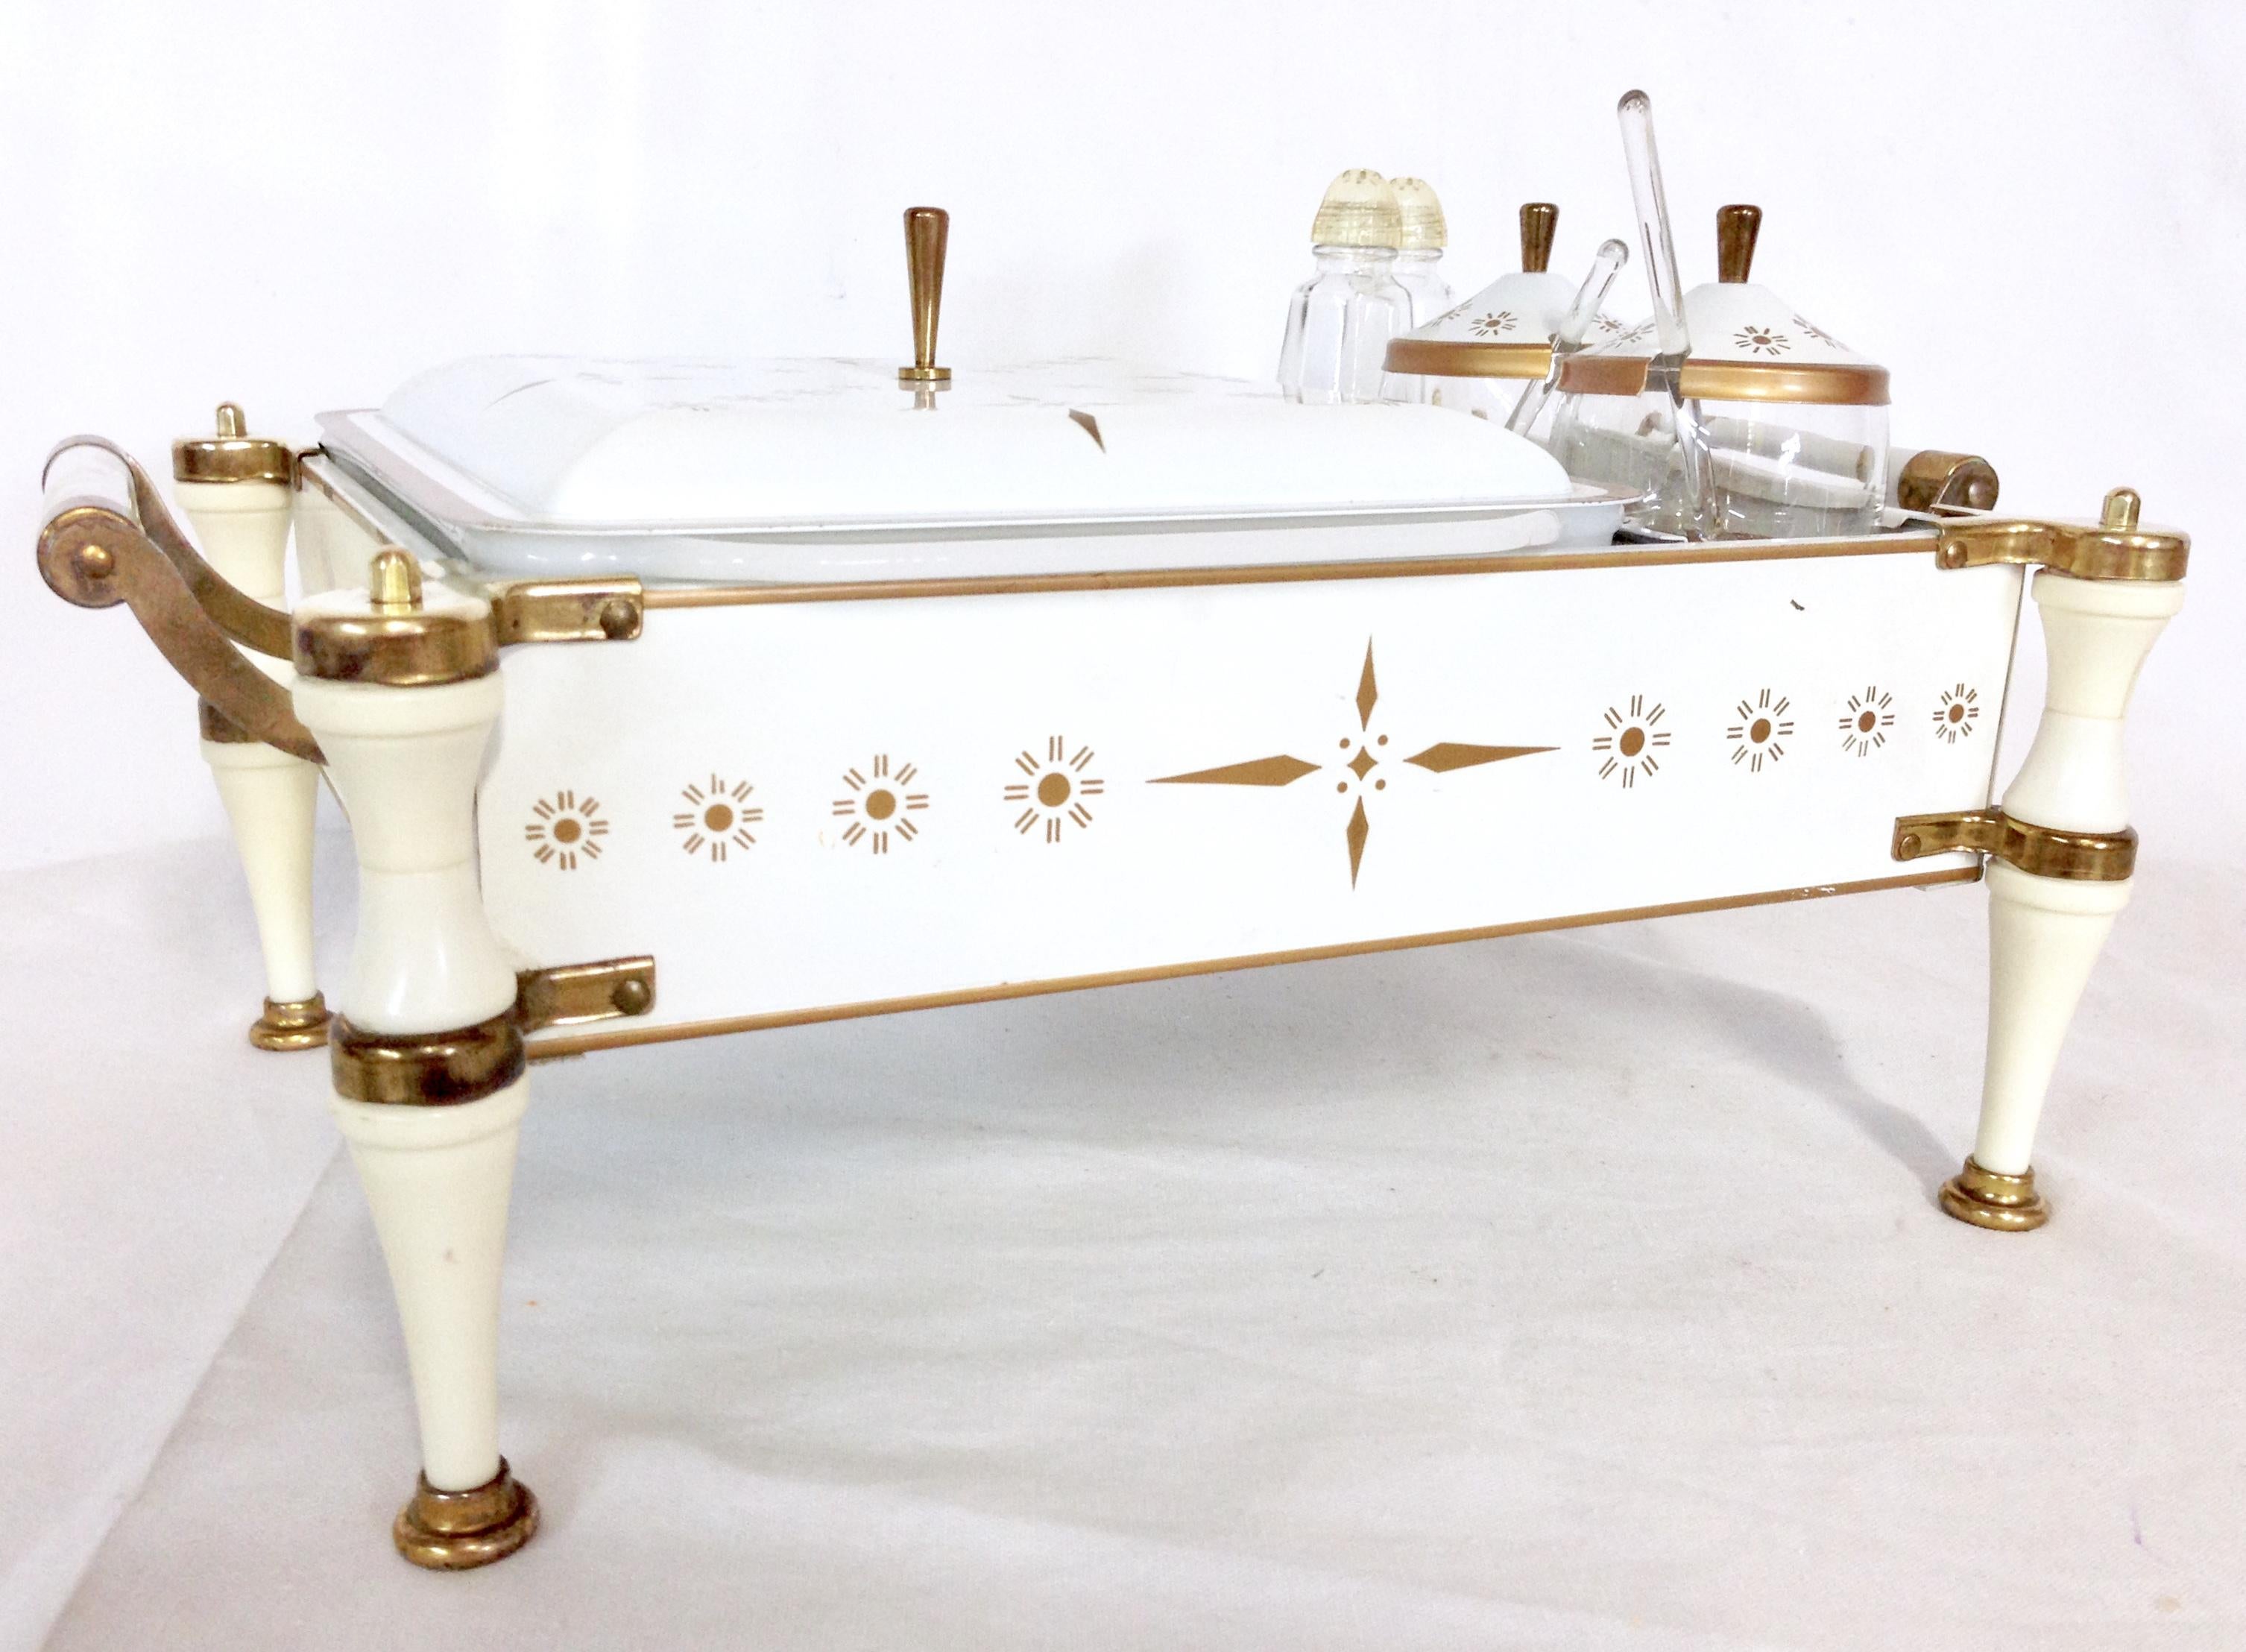 Rare 20th Century enameled metal and brass chafing warming dish set of eleven pieces by, Fire King. For Anchor Hocking. Features a white and gold tone geometric enameled motif, with brass feet, handles and lid knobs.
Set includes, 1 opaque white